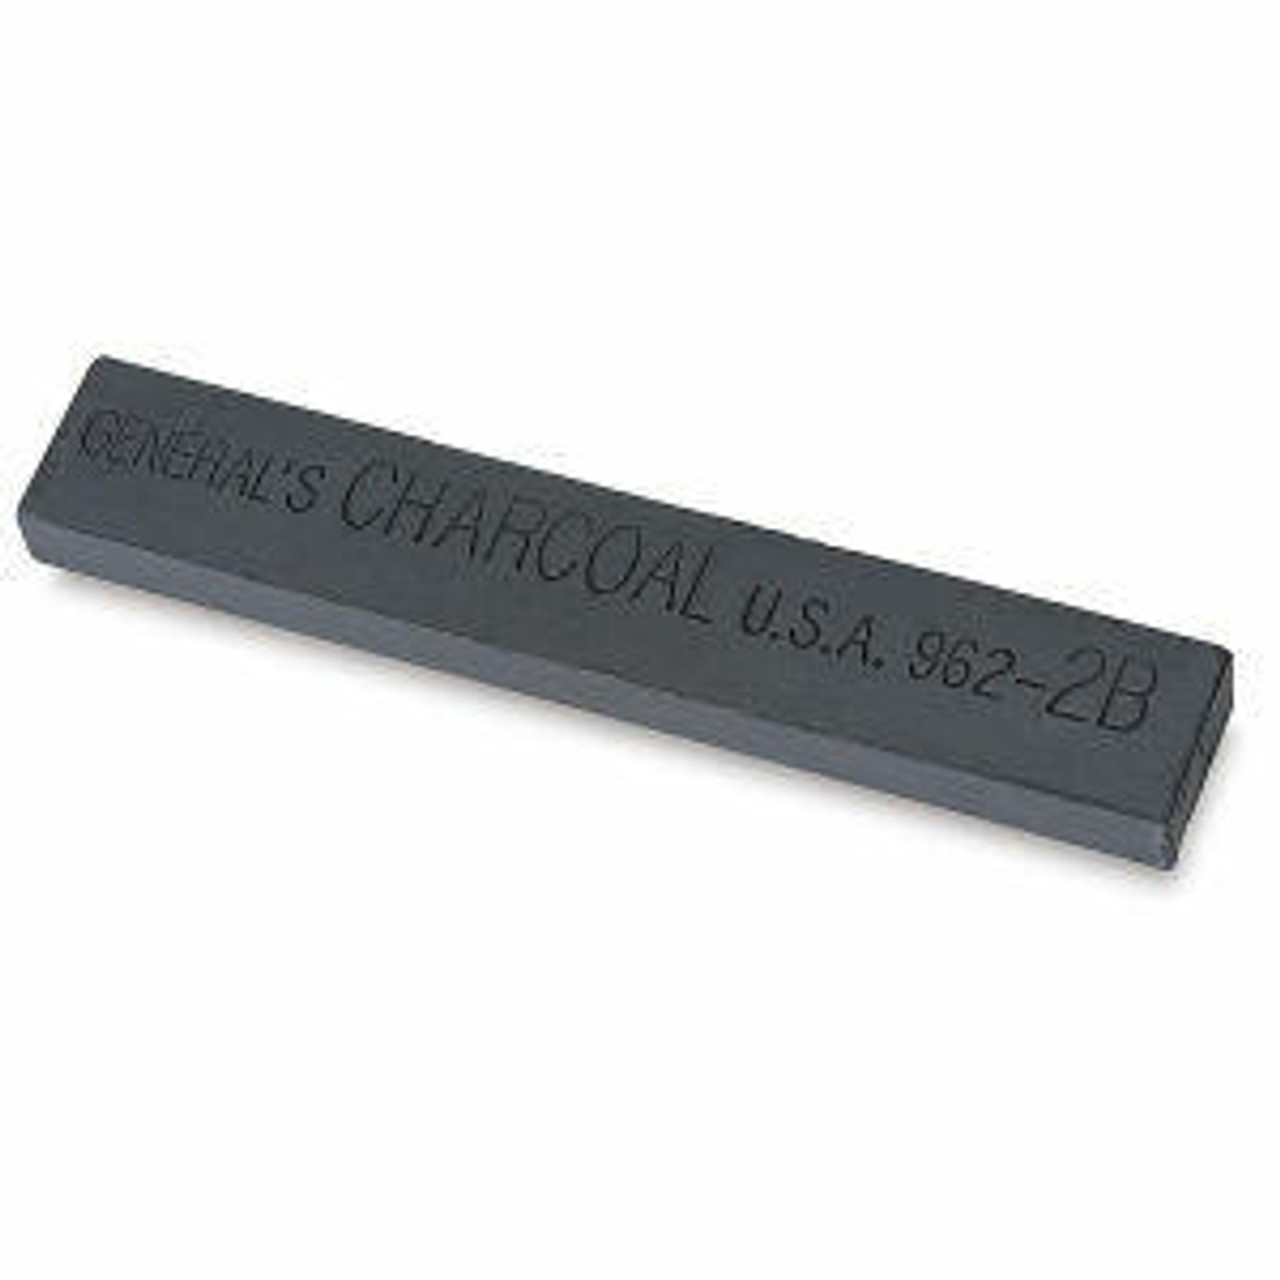 GENERAL PENCIL CO., INC. 6B EXTRA SOFT COMPRESSED CHARCOAL STICK